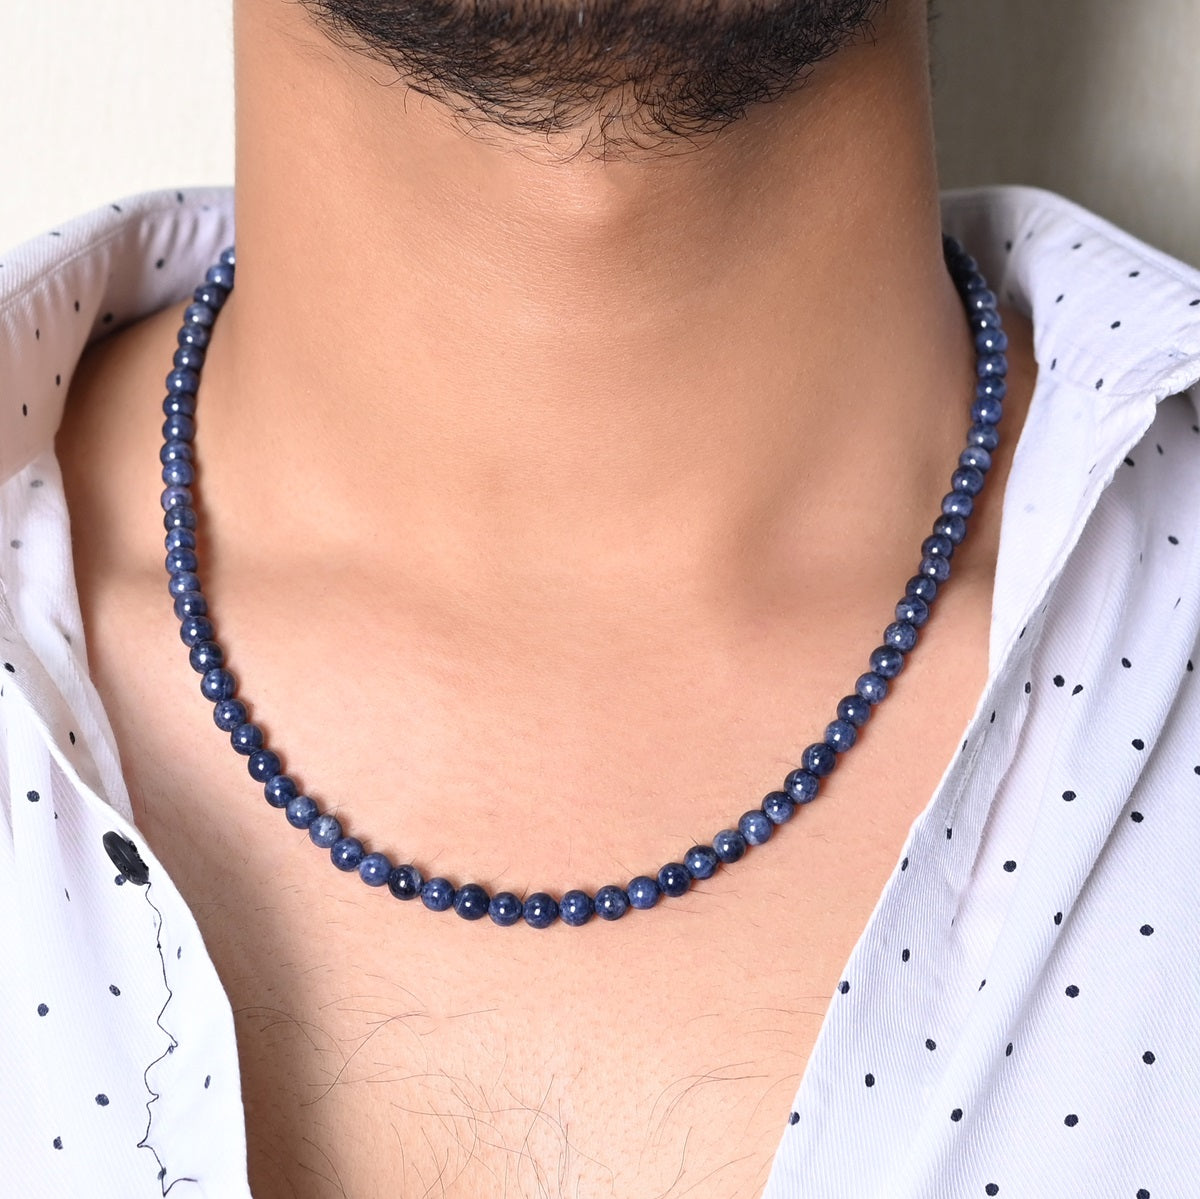 Men's Blue Sapphire Gemstone Silver Necklace: Versatile accessory for any occasion